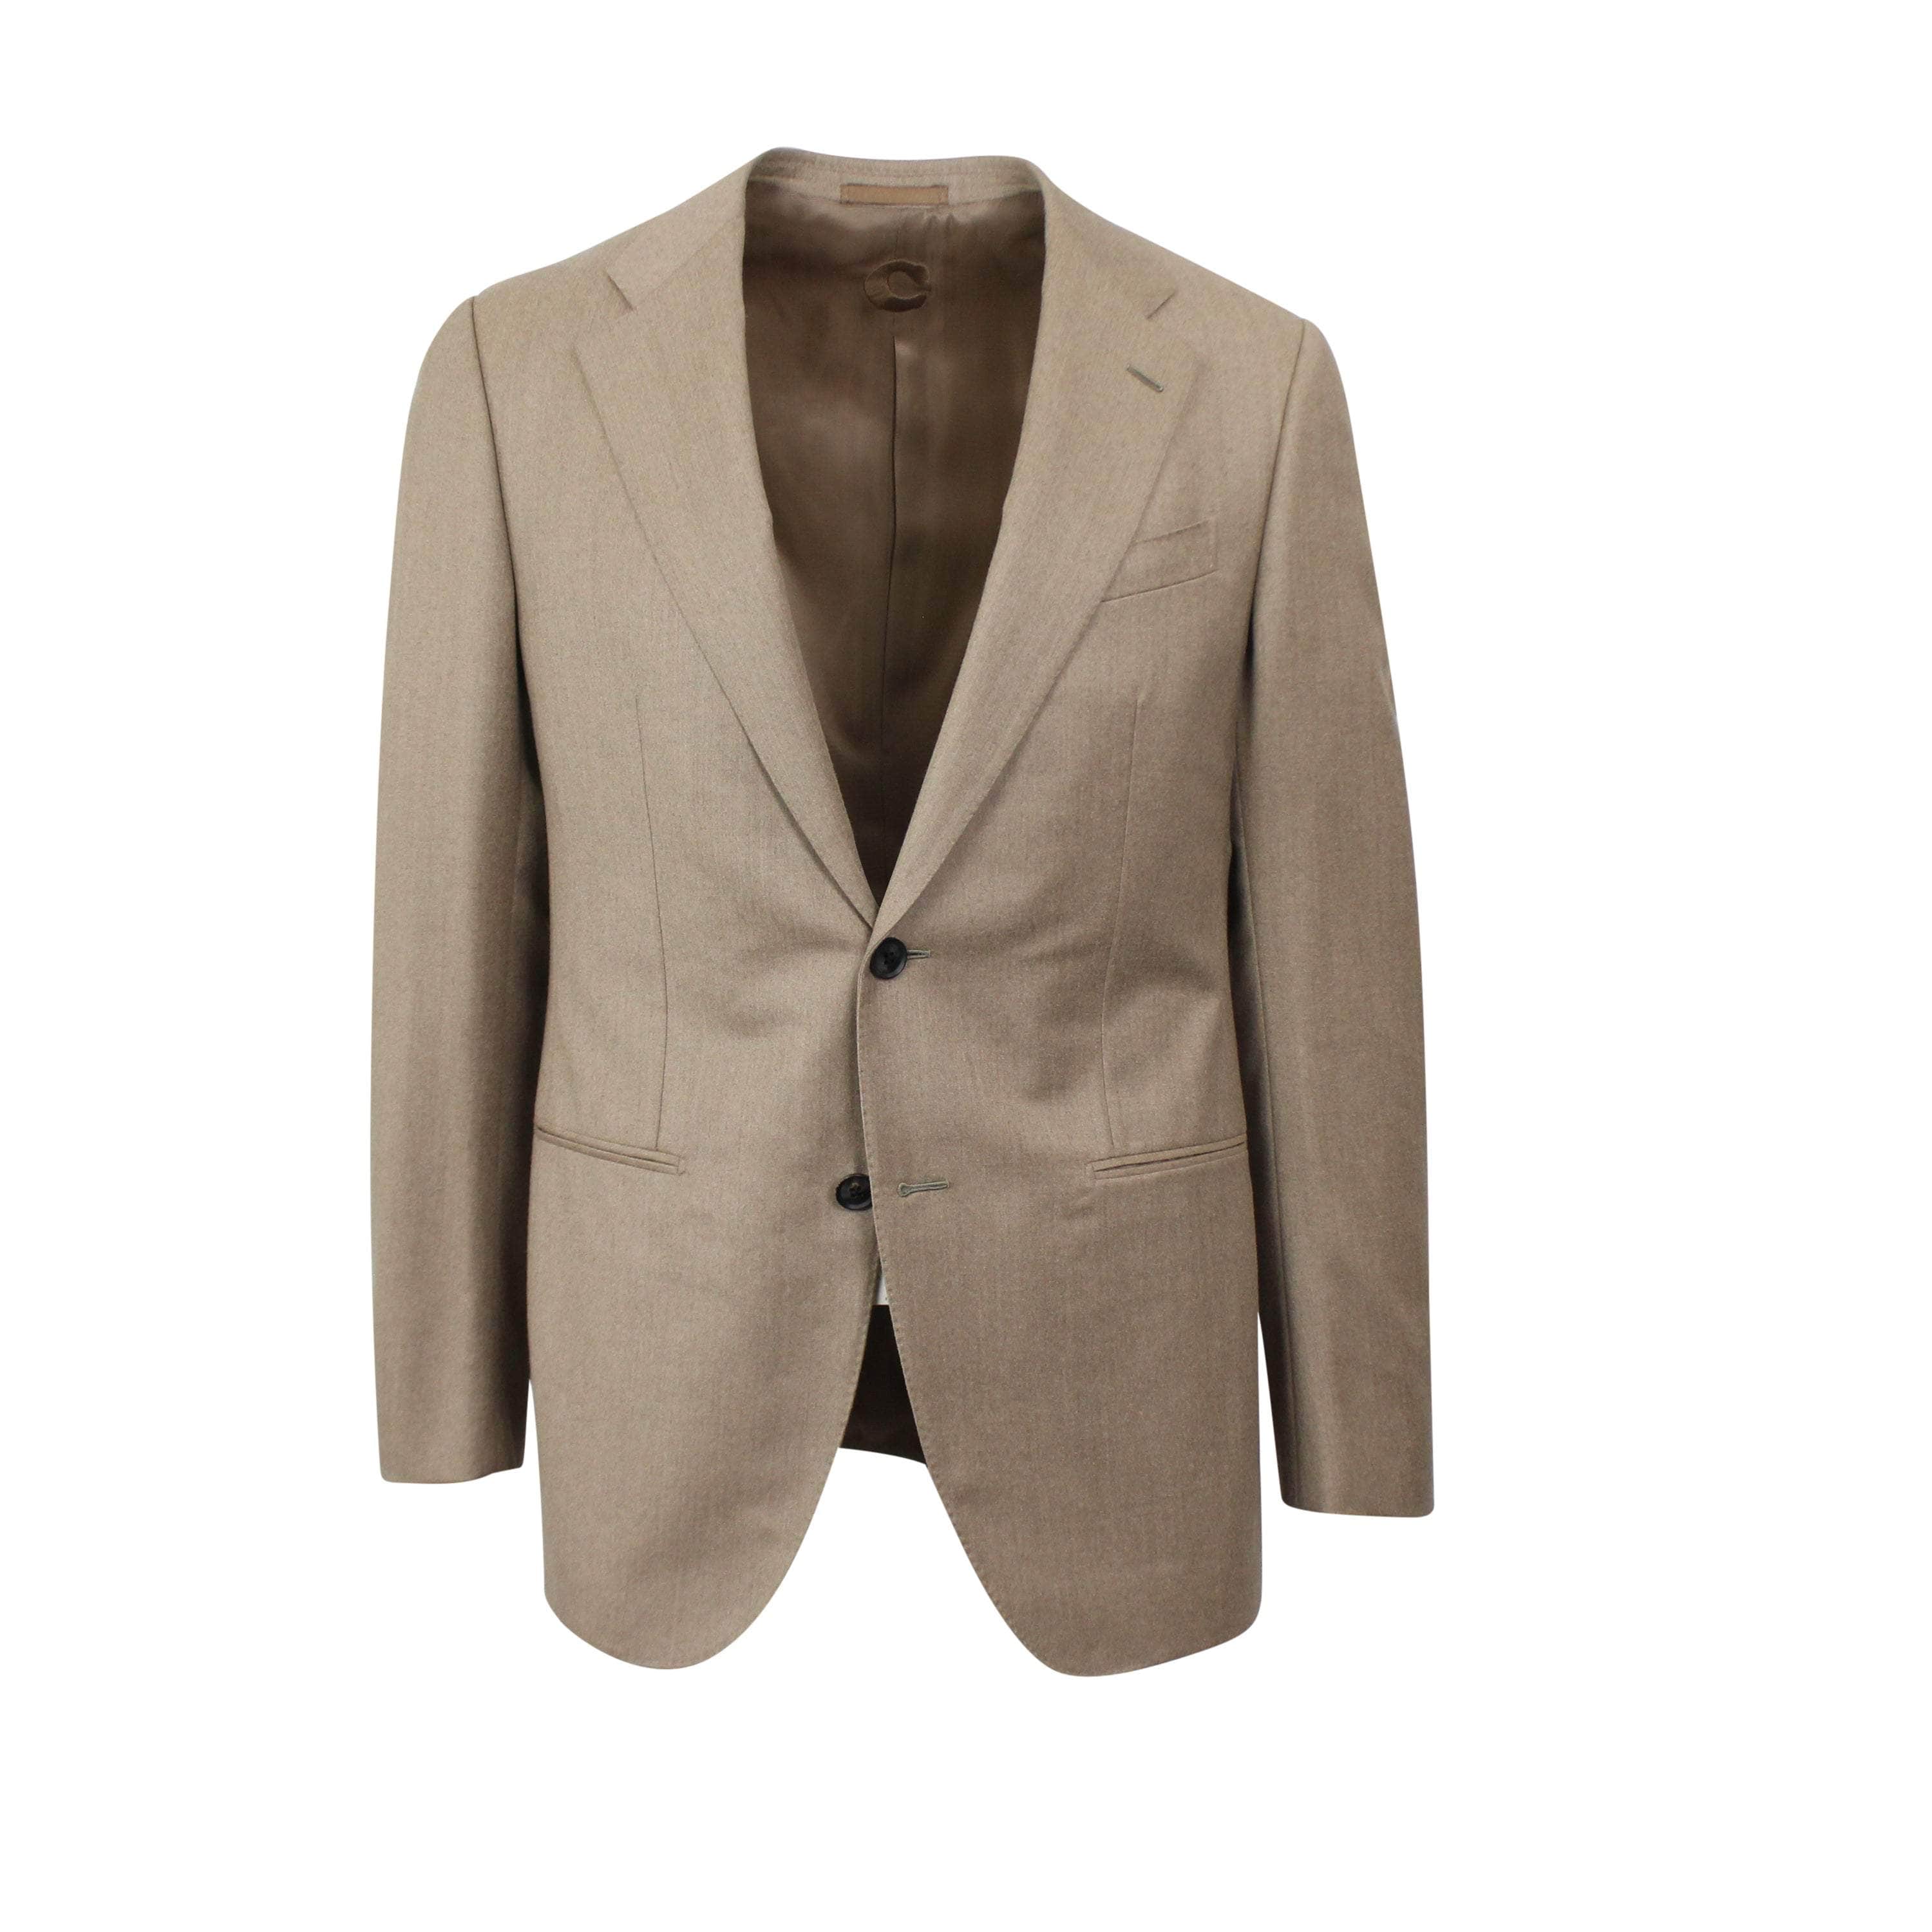 Caruso 500-750, caruso, channelenable-all, chicmi, couponcollection, main-clothing, shop375, size-50, Stadium Goods, stadiumgoods 50 Beige Single Breasted Beige Camel Hair And Wool Suit-8R CRS-XTPS-0170/50 CRS-XTPS-0170/50